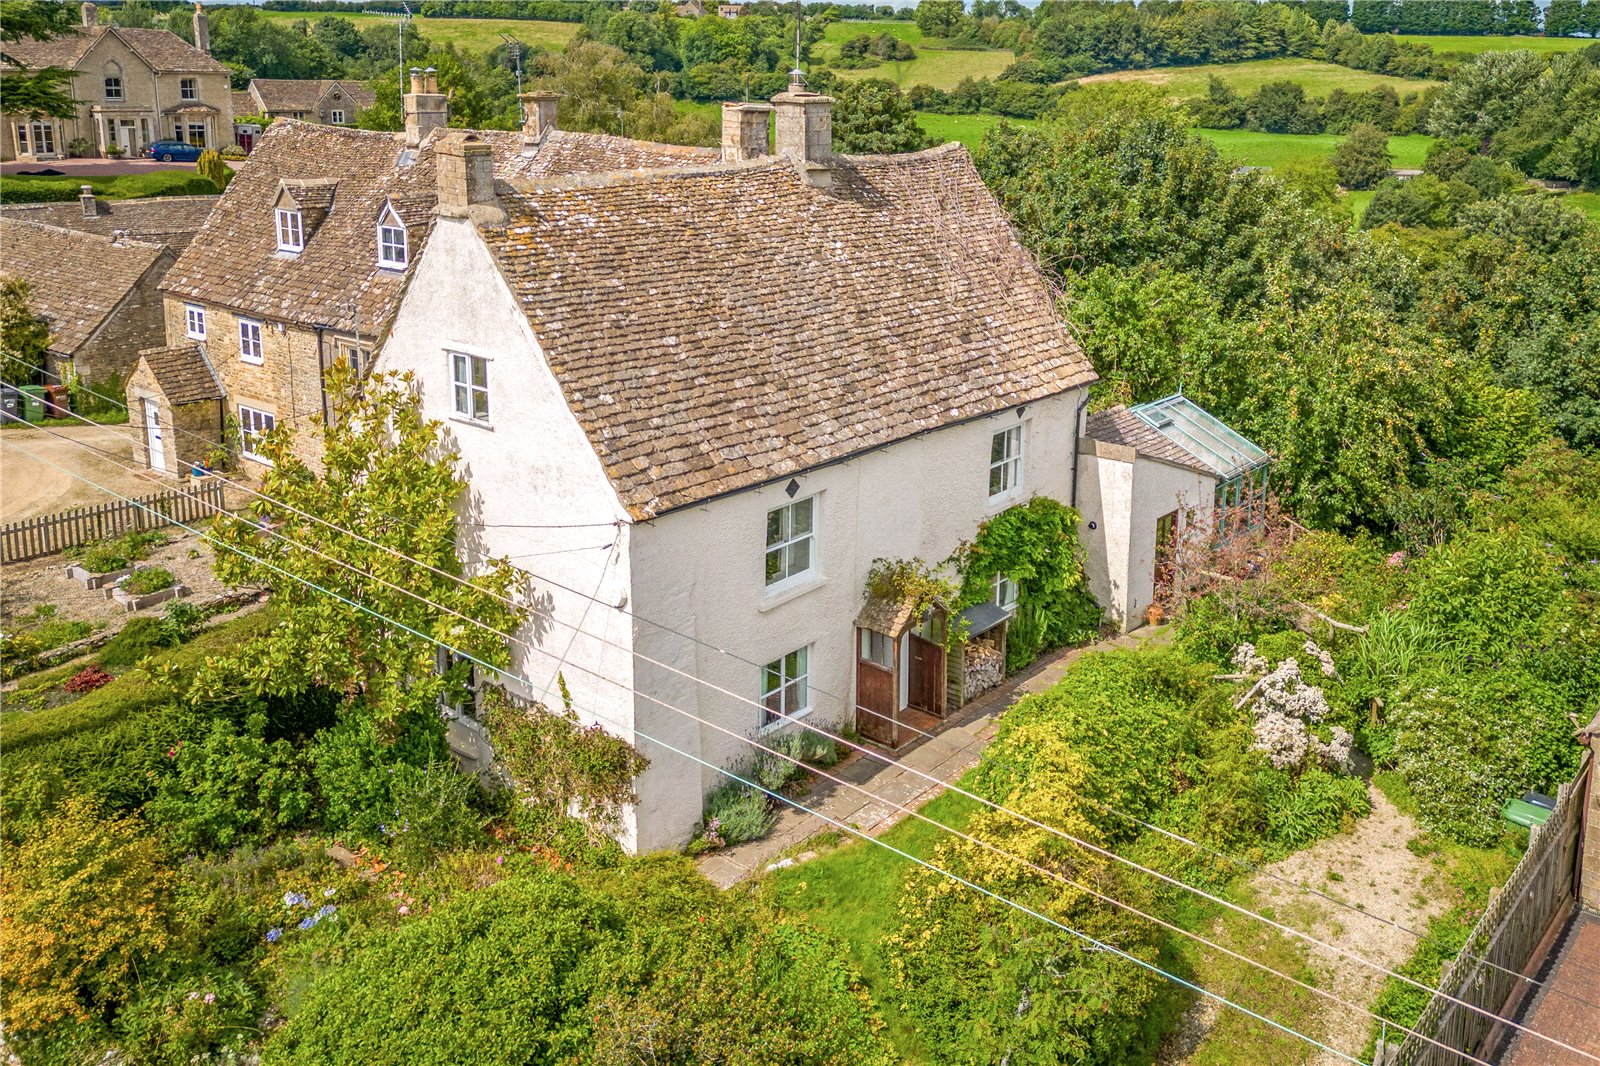 Nupend, Horsley, Stroud, Gloucestershire, GL6